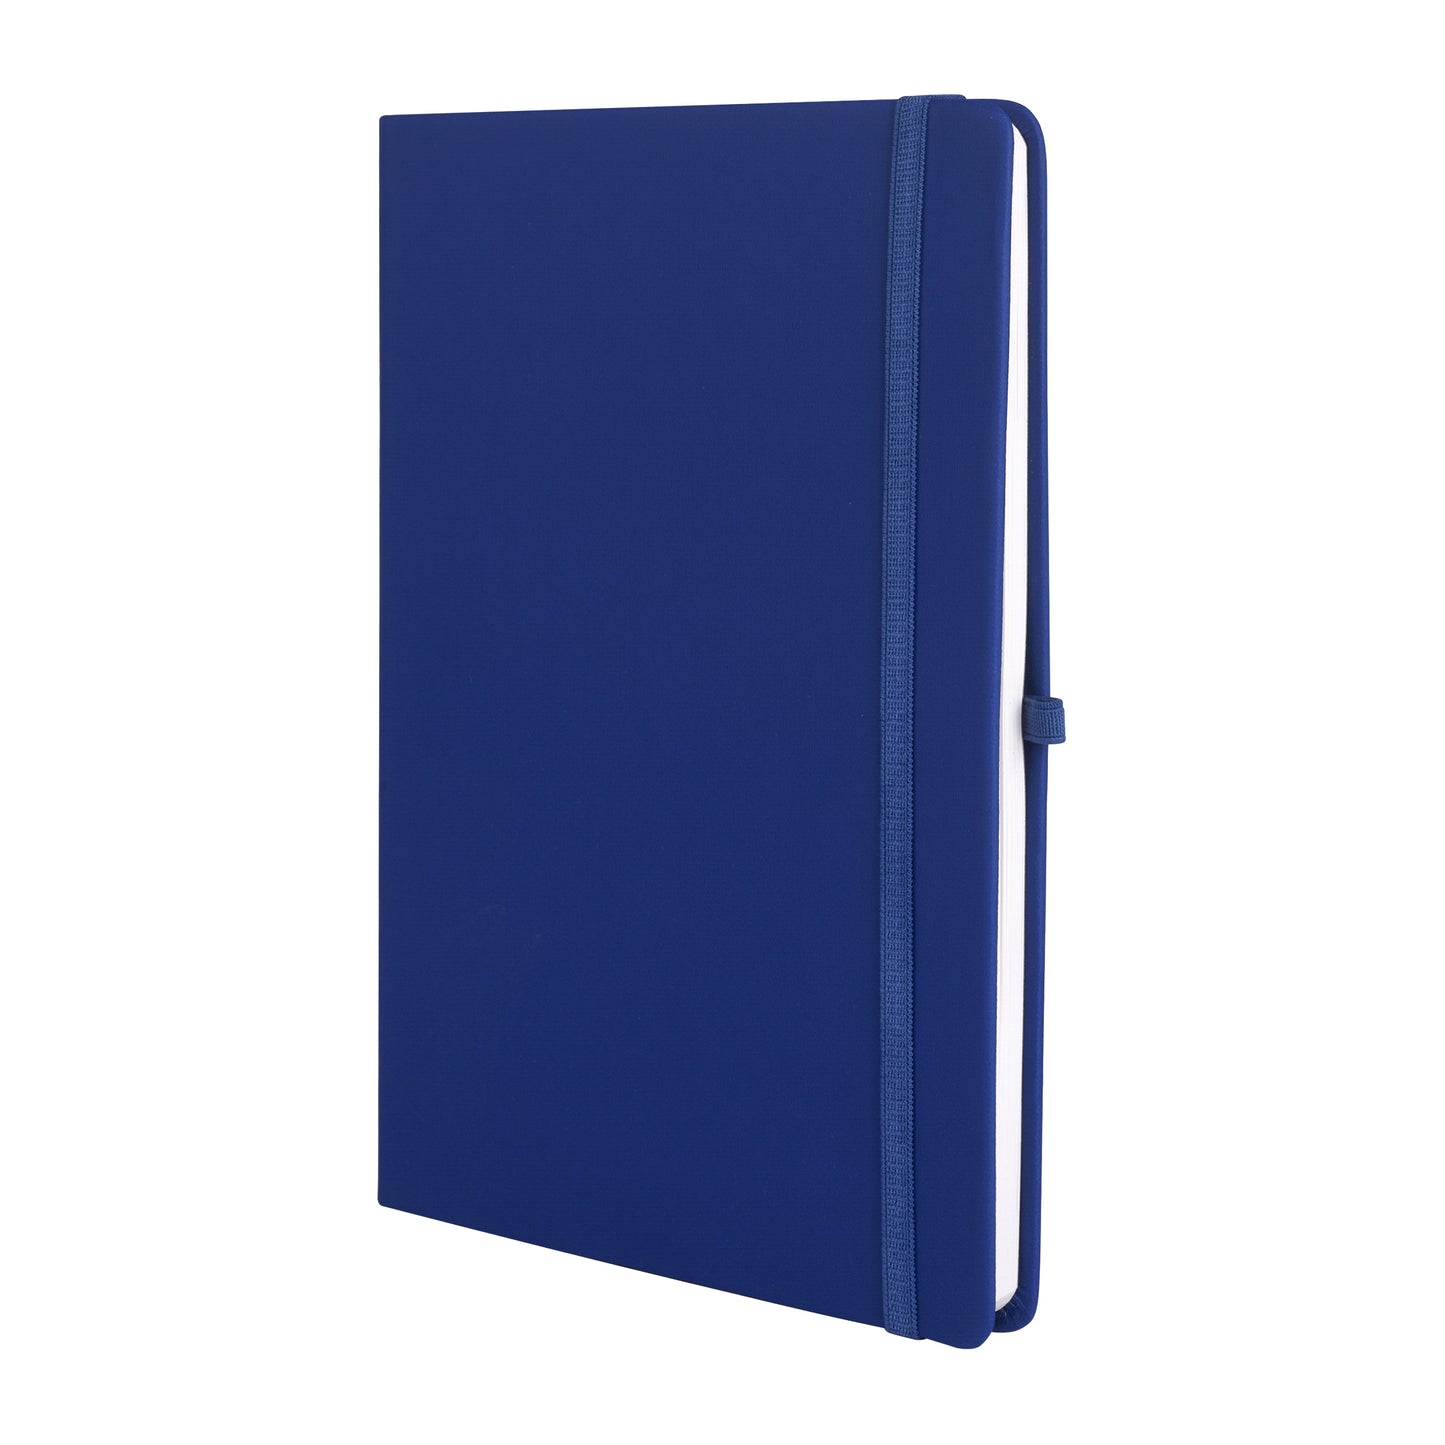 Navy Blue Color 3in1 Combo Gift Set Notebook Diary, Pen, and Bottle - For Employee Joining Kit, Corporate, Client or Dealer Gifting HKDB